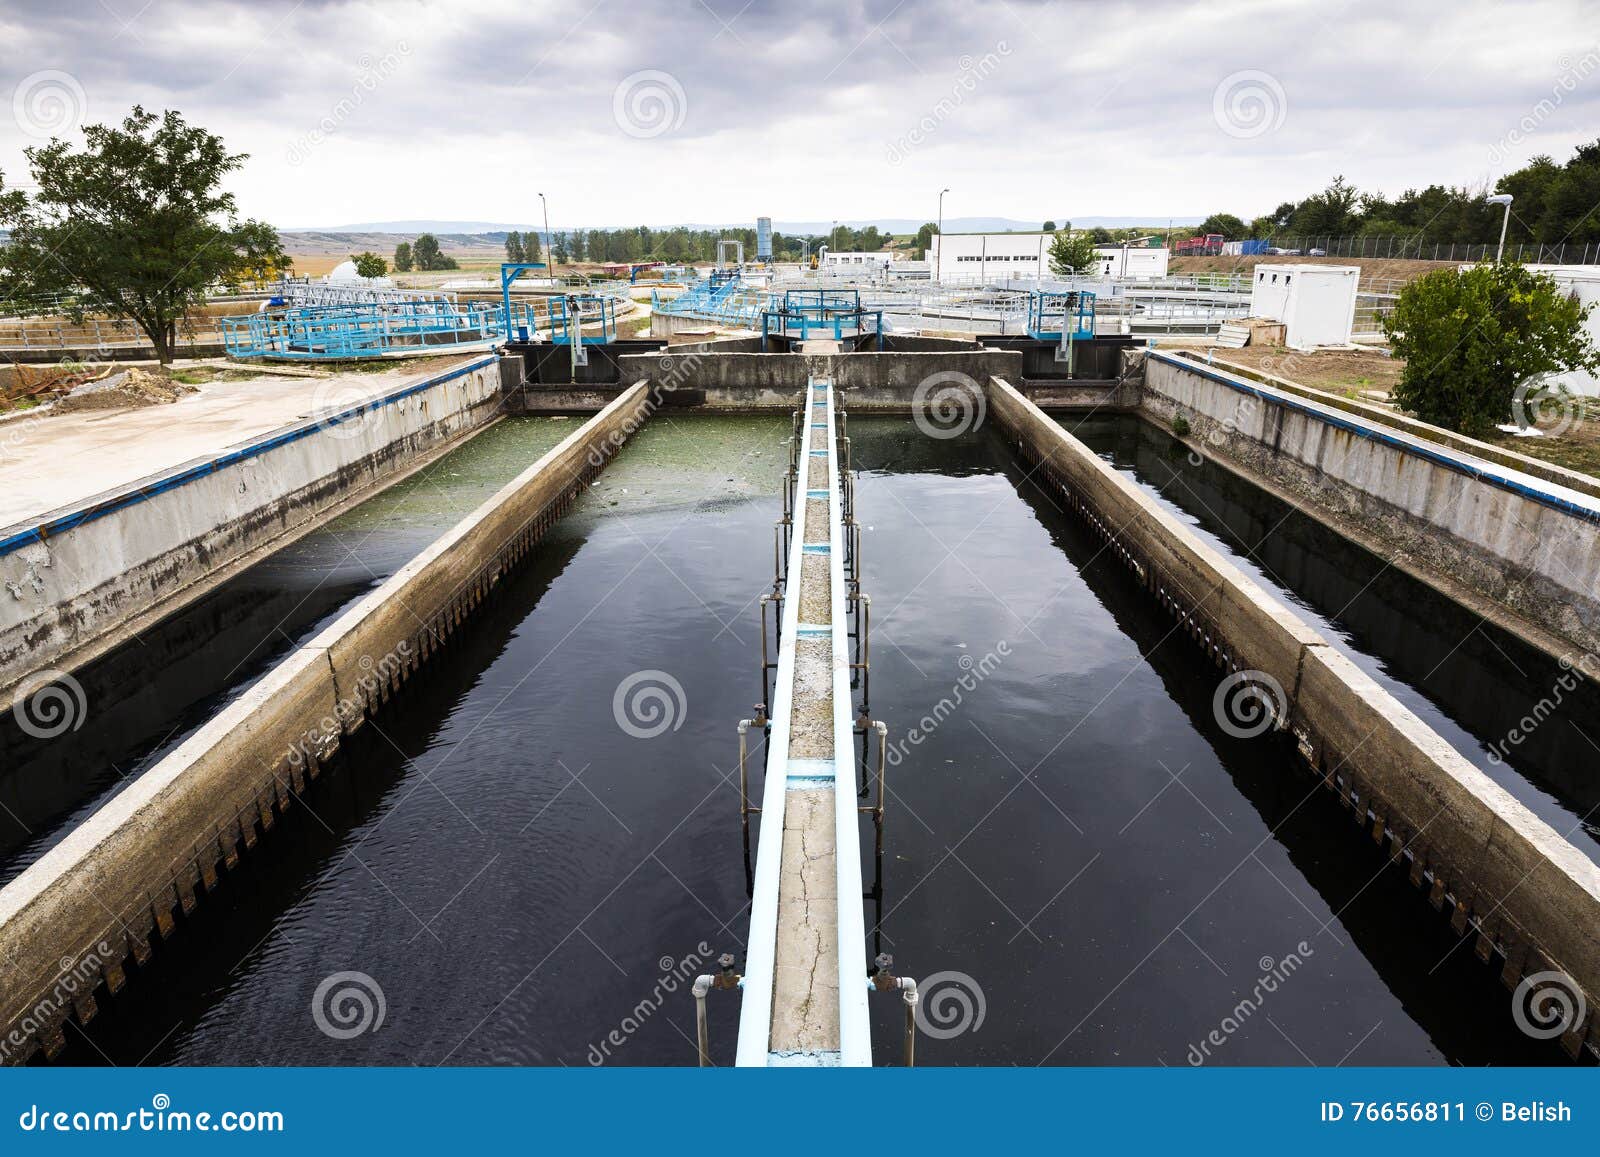 Wastewater Treatment Plant Water Tank Stock Image Image Of Reused